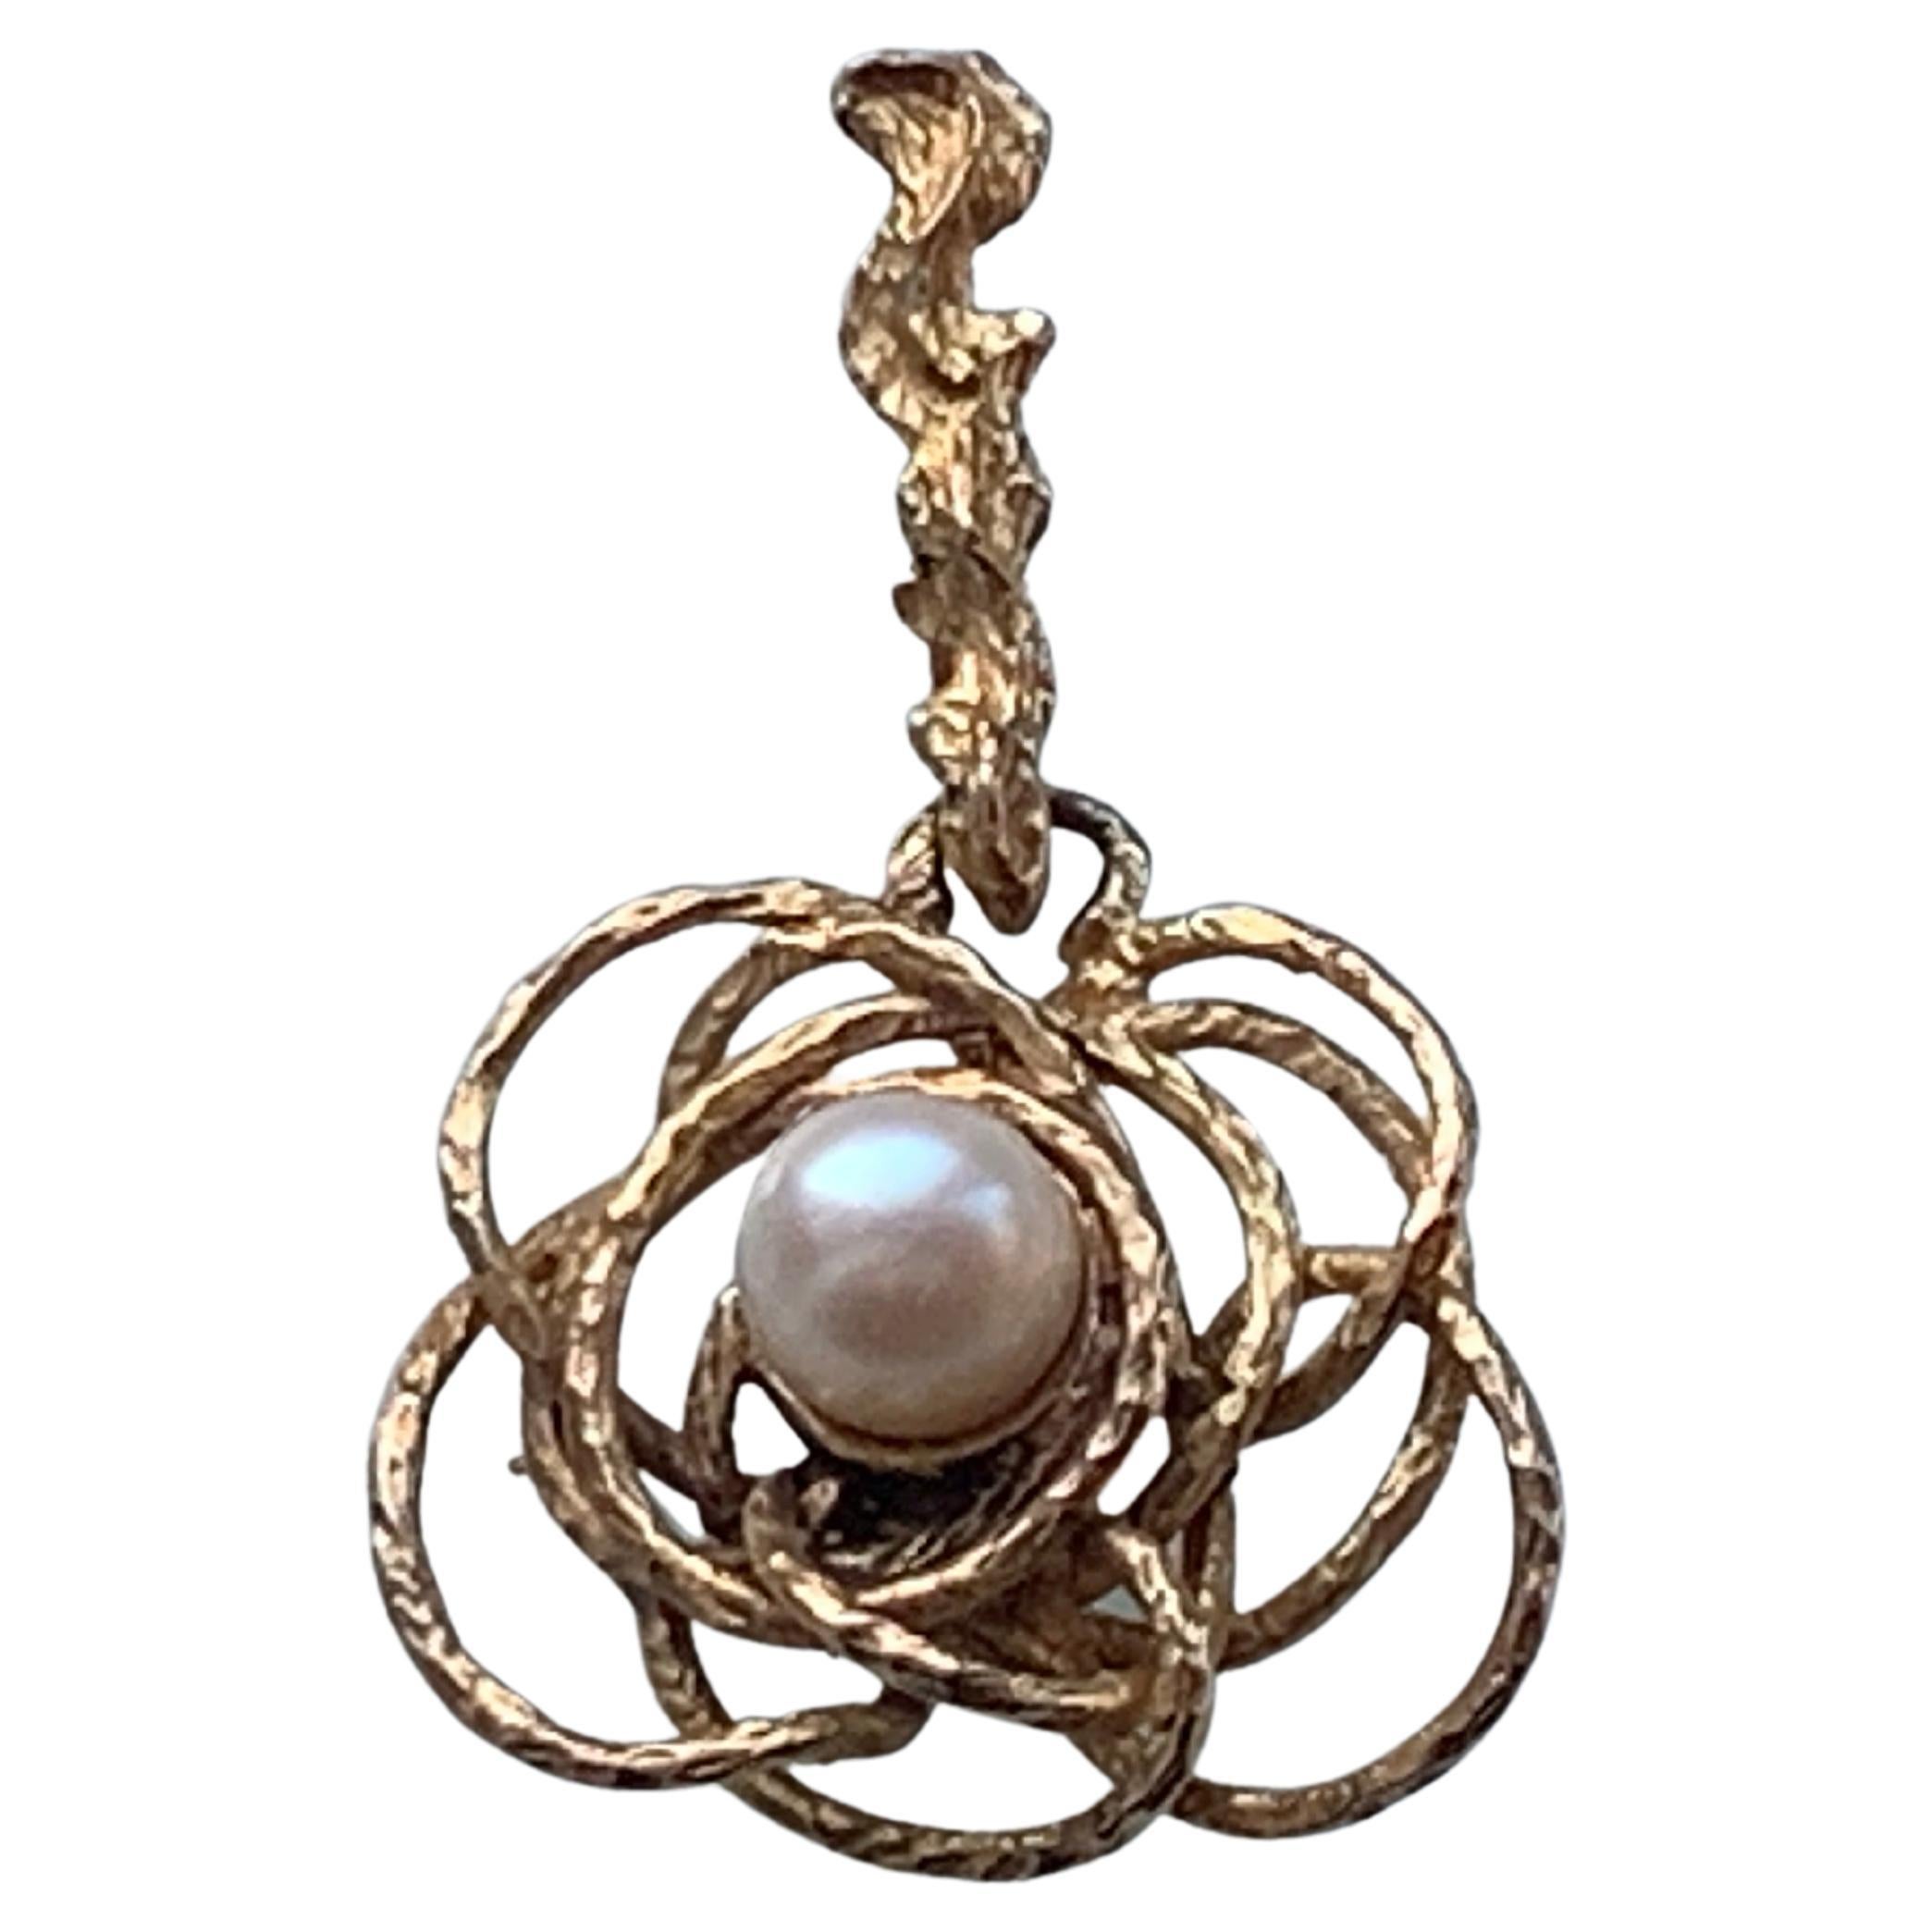 9ct Gold Twisting Bark Design with Central Pearl Pendant